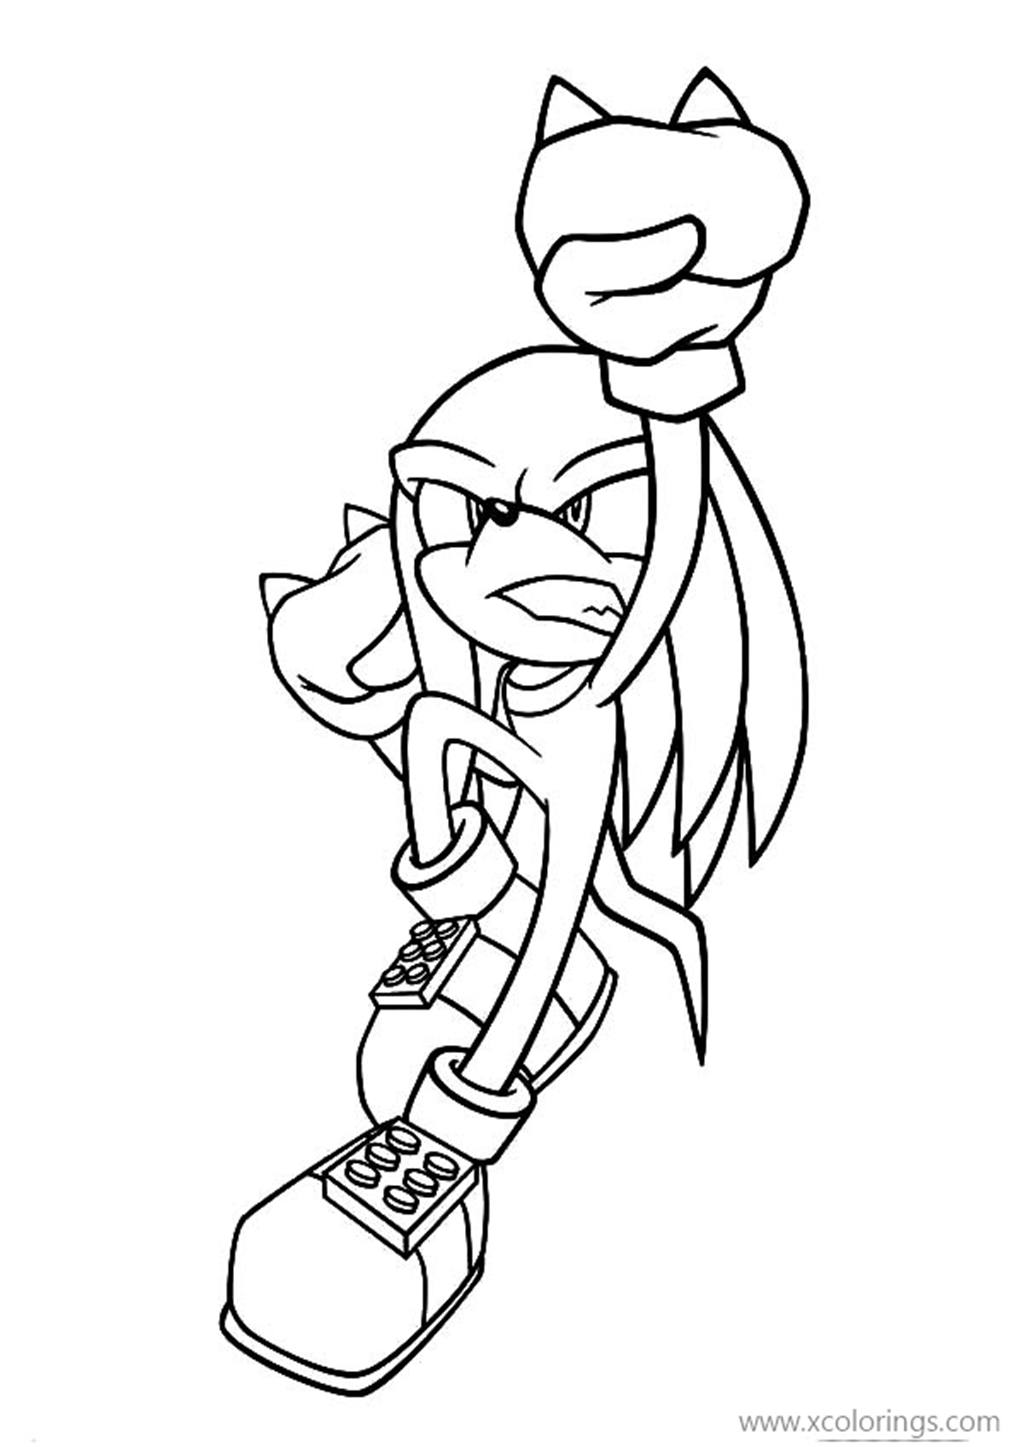 SEGA Knuckles The Echidna Coloring Pages